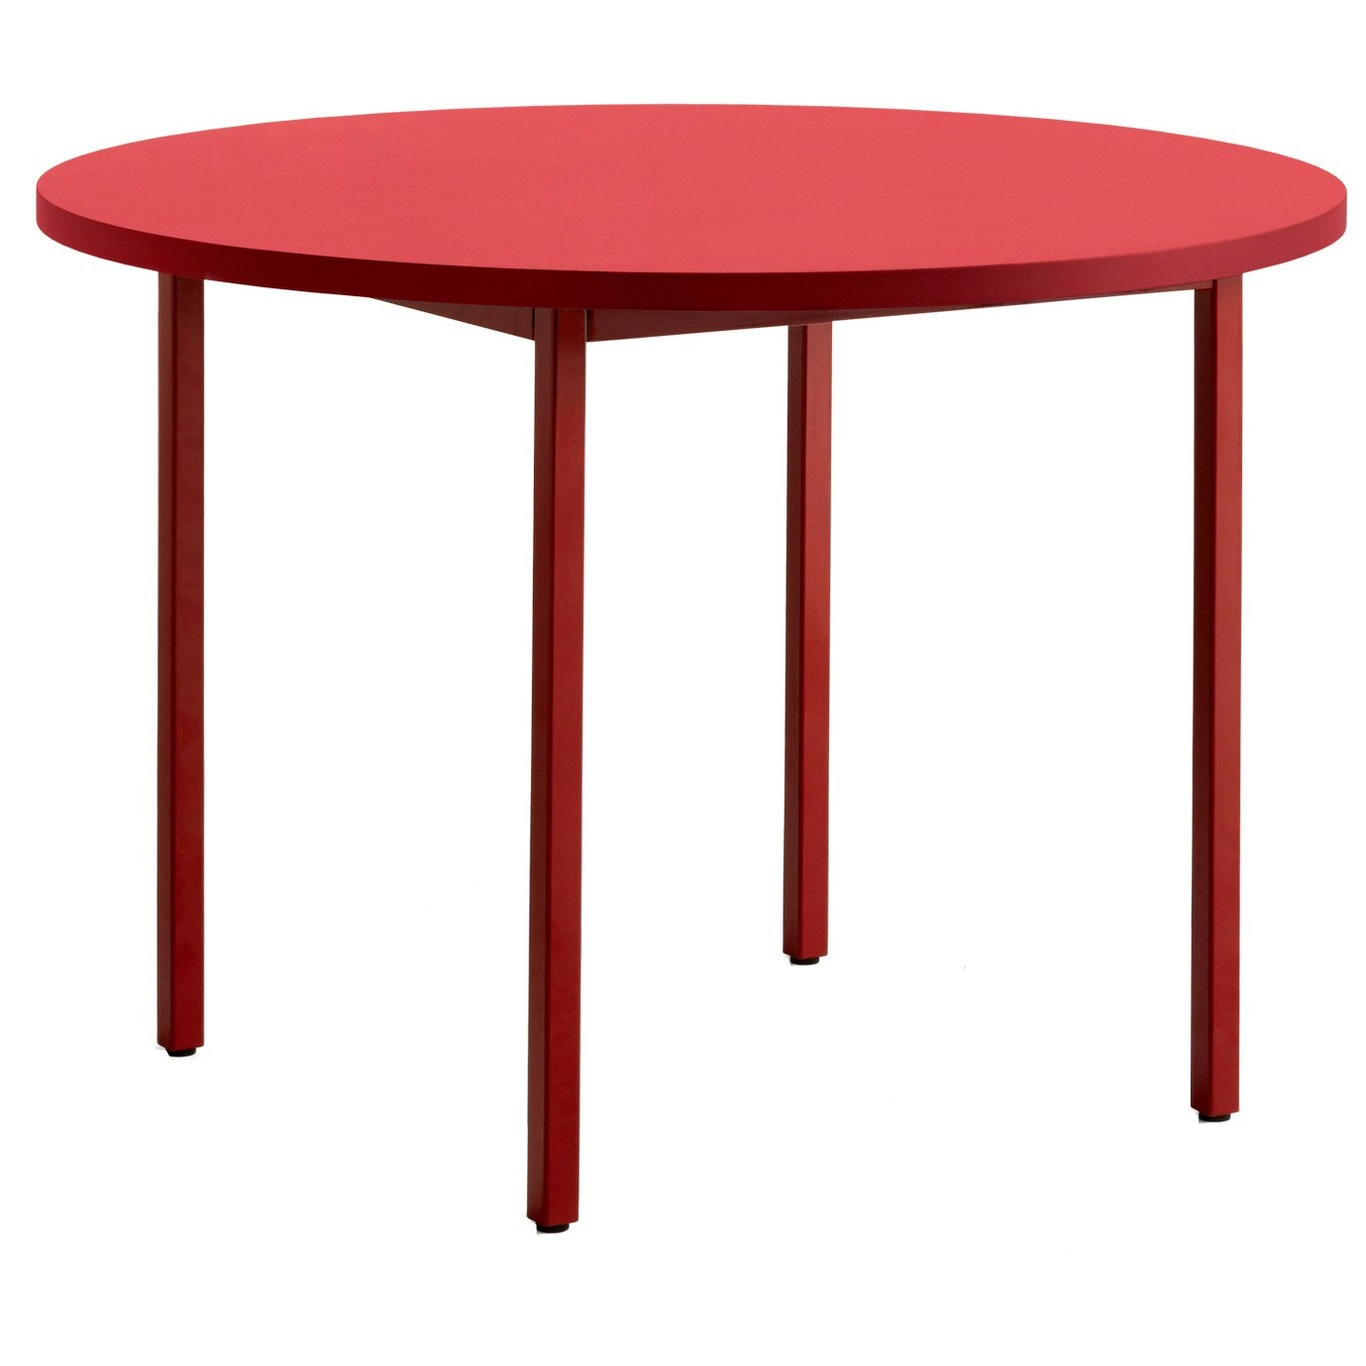 Two-Colour Table Ø105 cm, Wine / Red